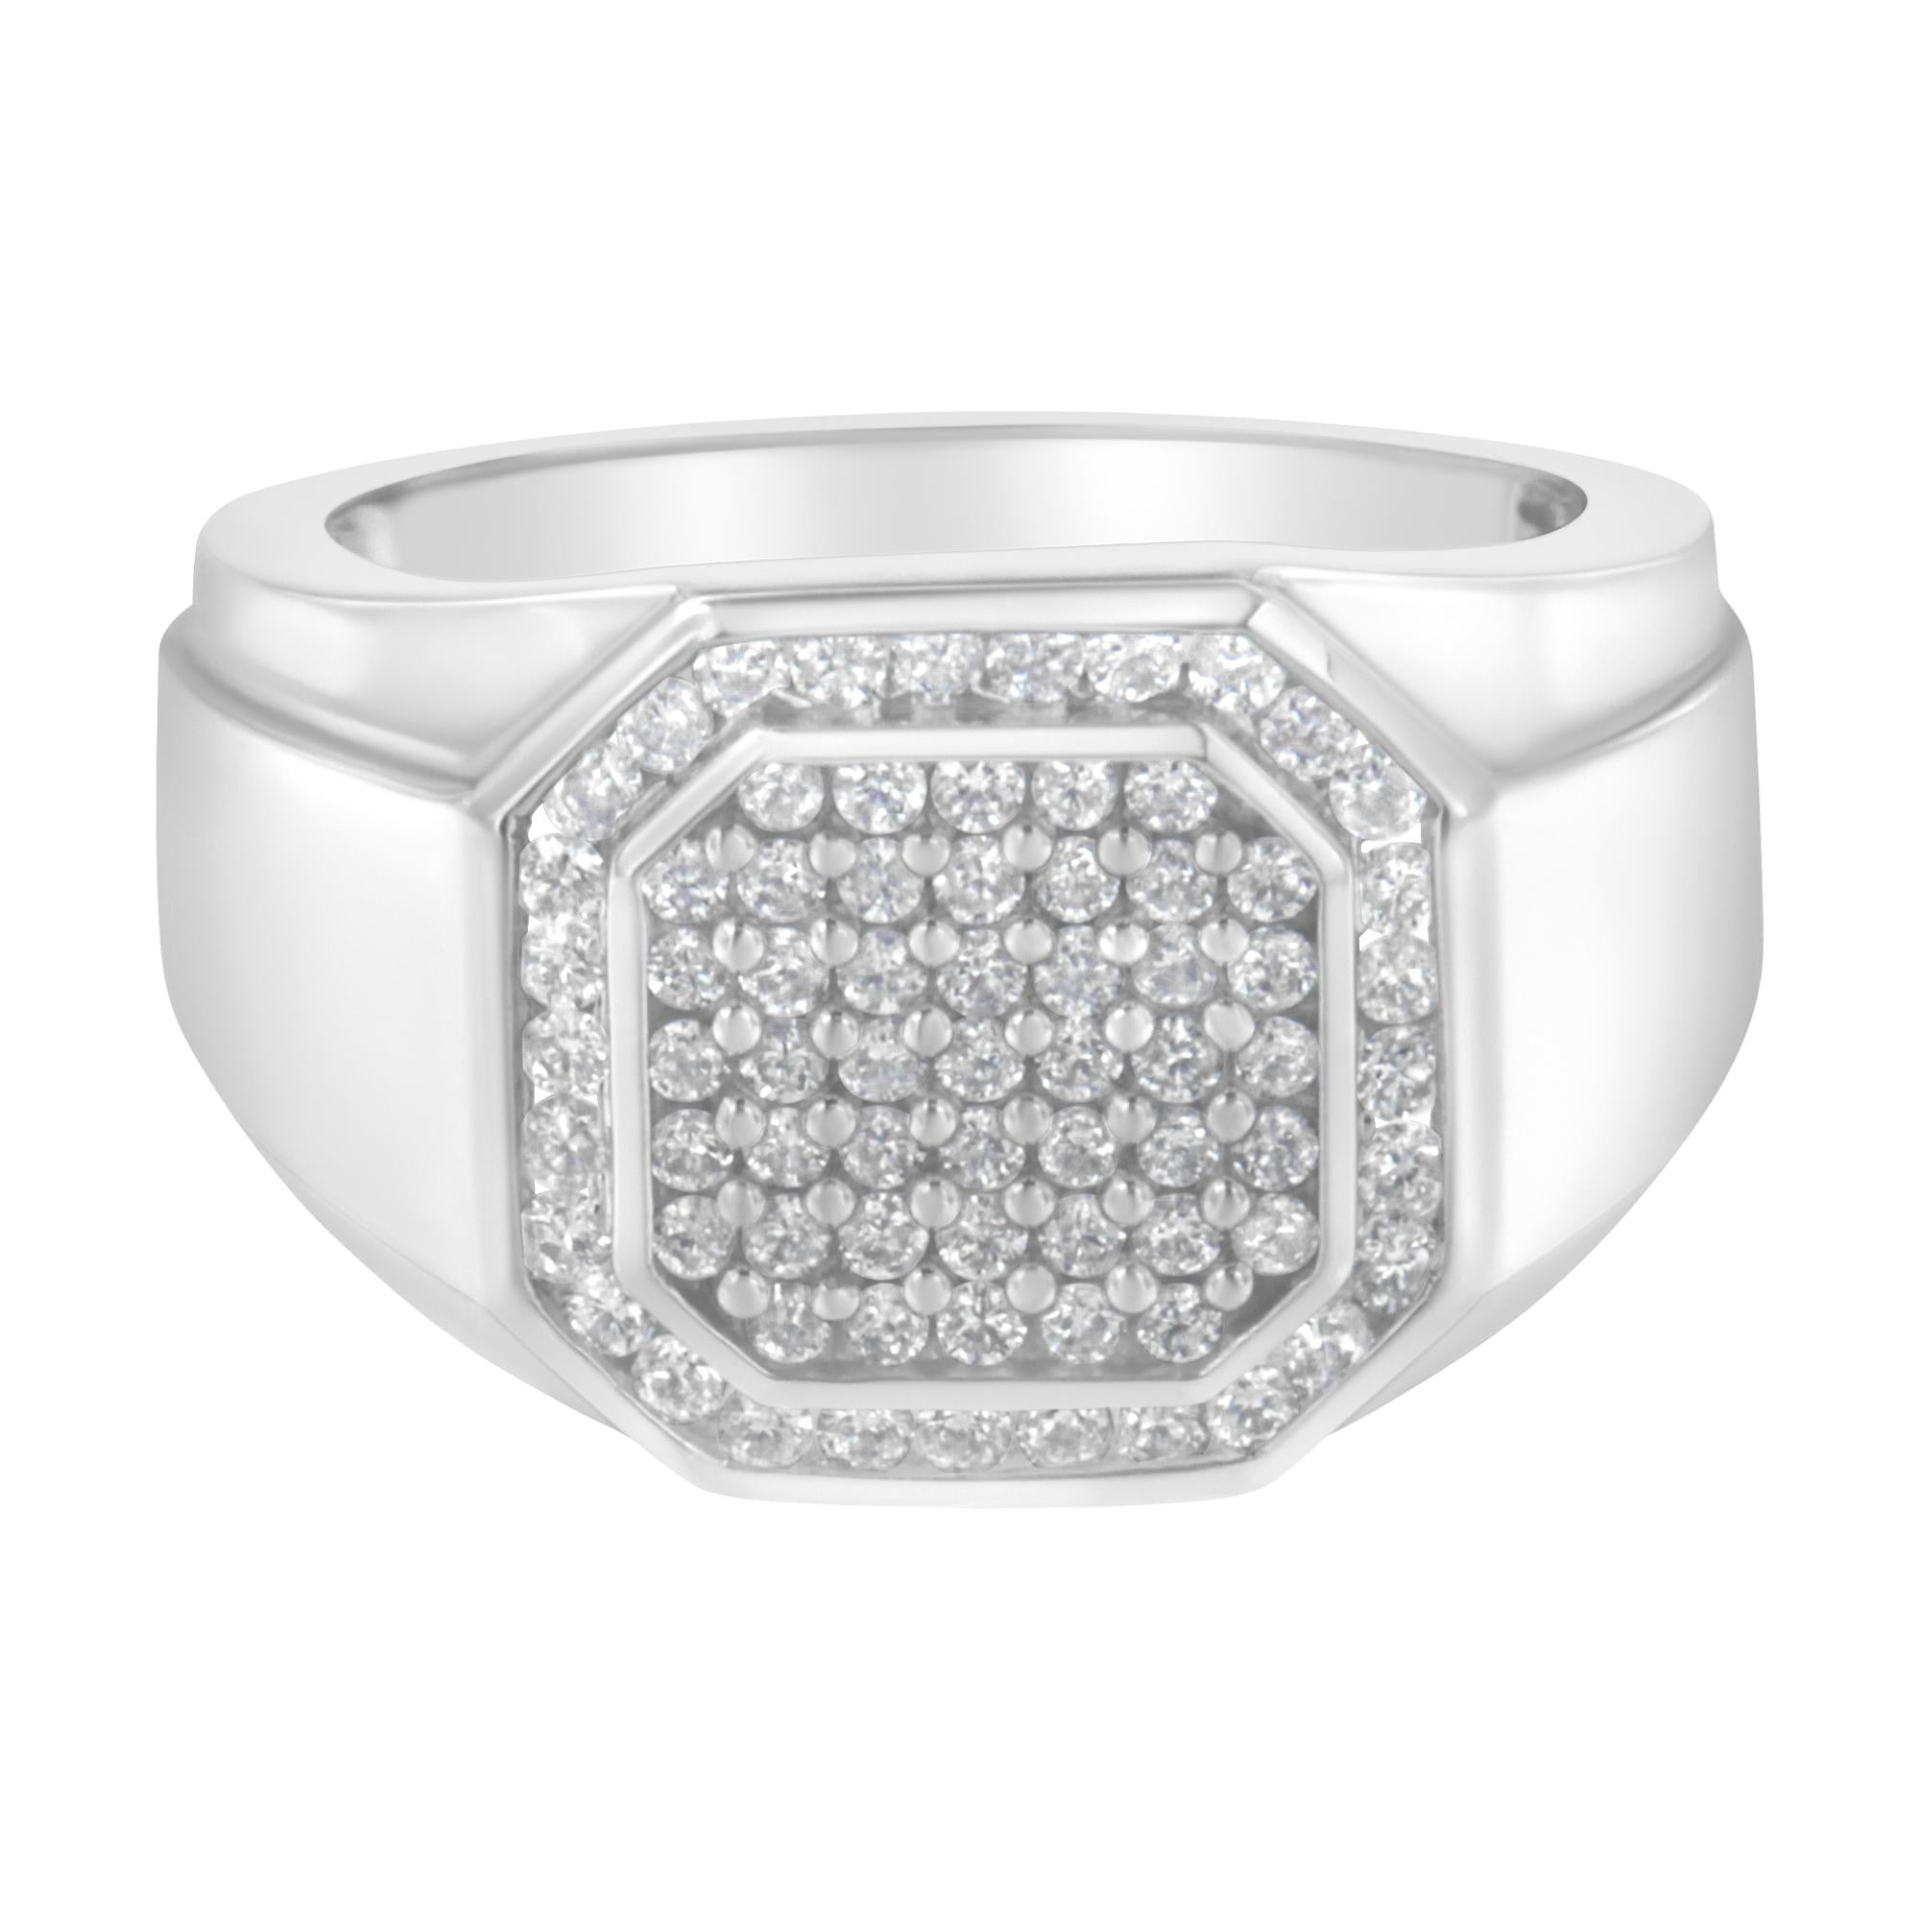 Men's 14KT White Gold Diamond Cocktail Ring (1 cttw, H-I Color, SI2-I1 Clarity), Goodies N Stuff